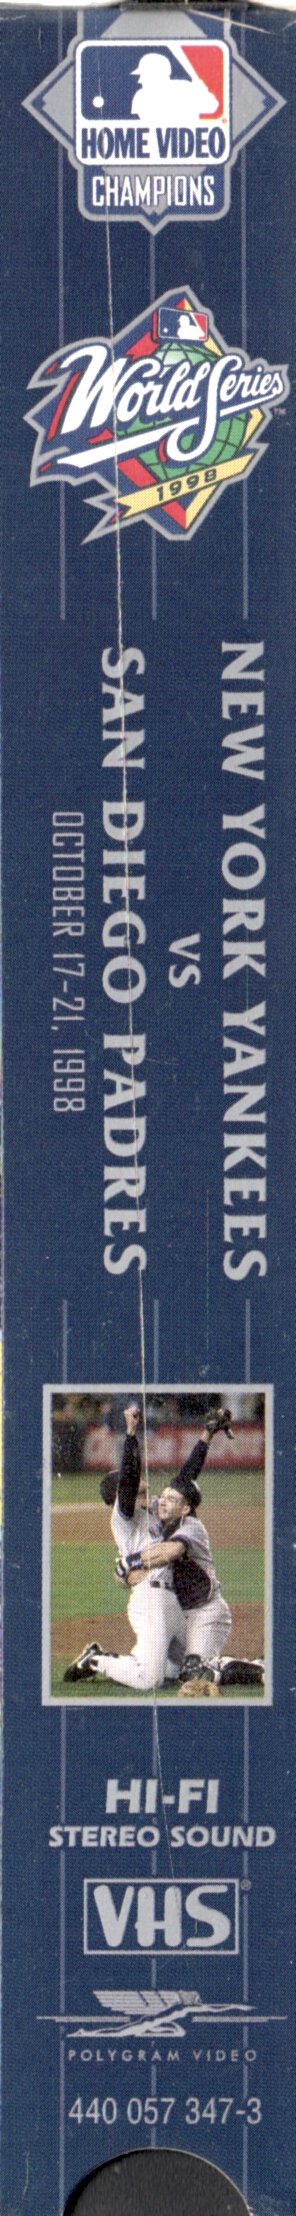 1998 Official World Series Video - New York Yankees vs. San Diego Padres VHS